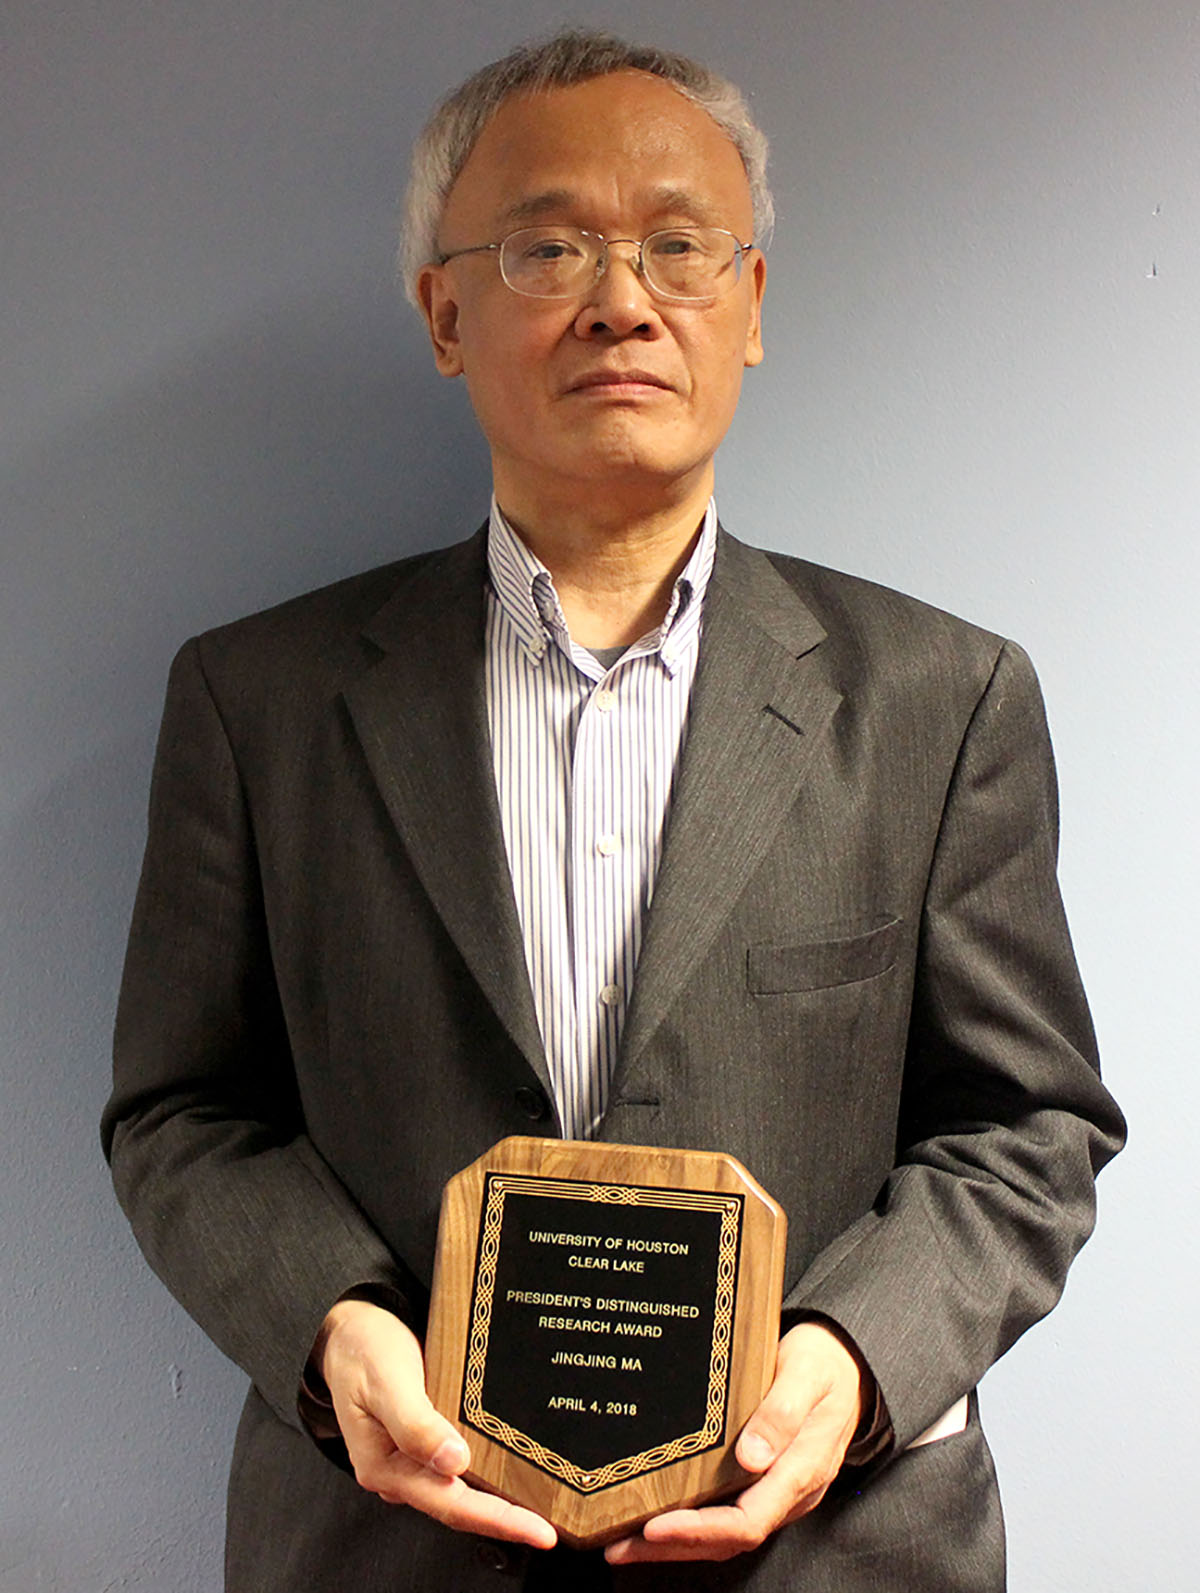 PHOTO: The 2018 UHCL Distinguished Faculty Research Award winner is Jingjing Ma, department chair of mathematics and statistics and professor of mathematics. Photo by the Signal reporter Nancy Nguyen.